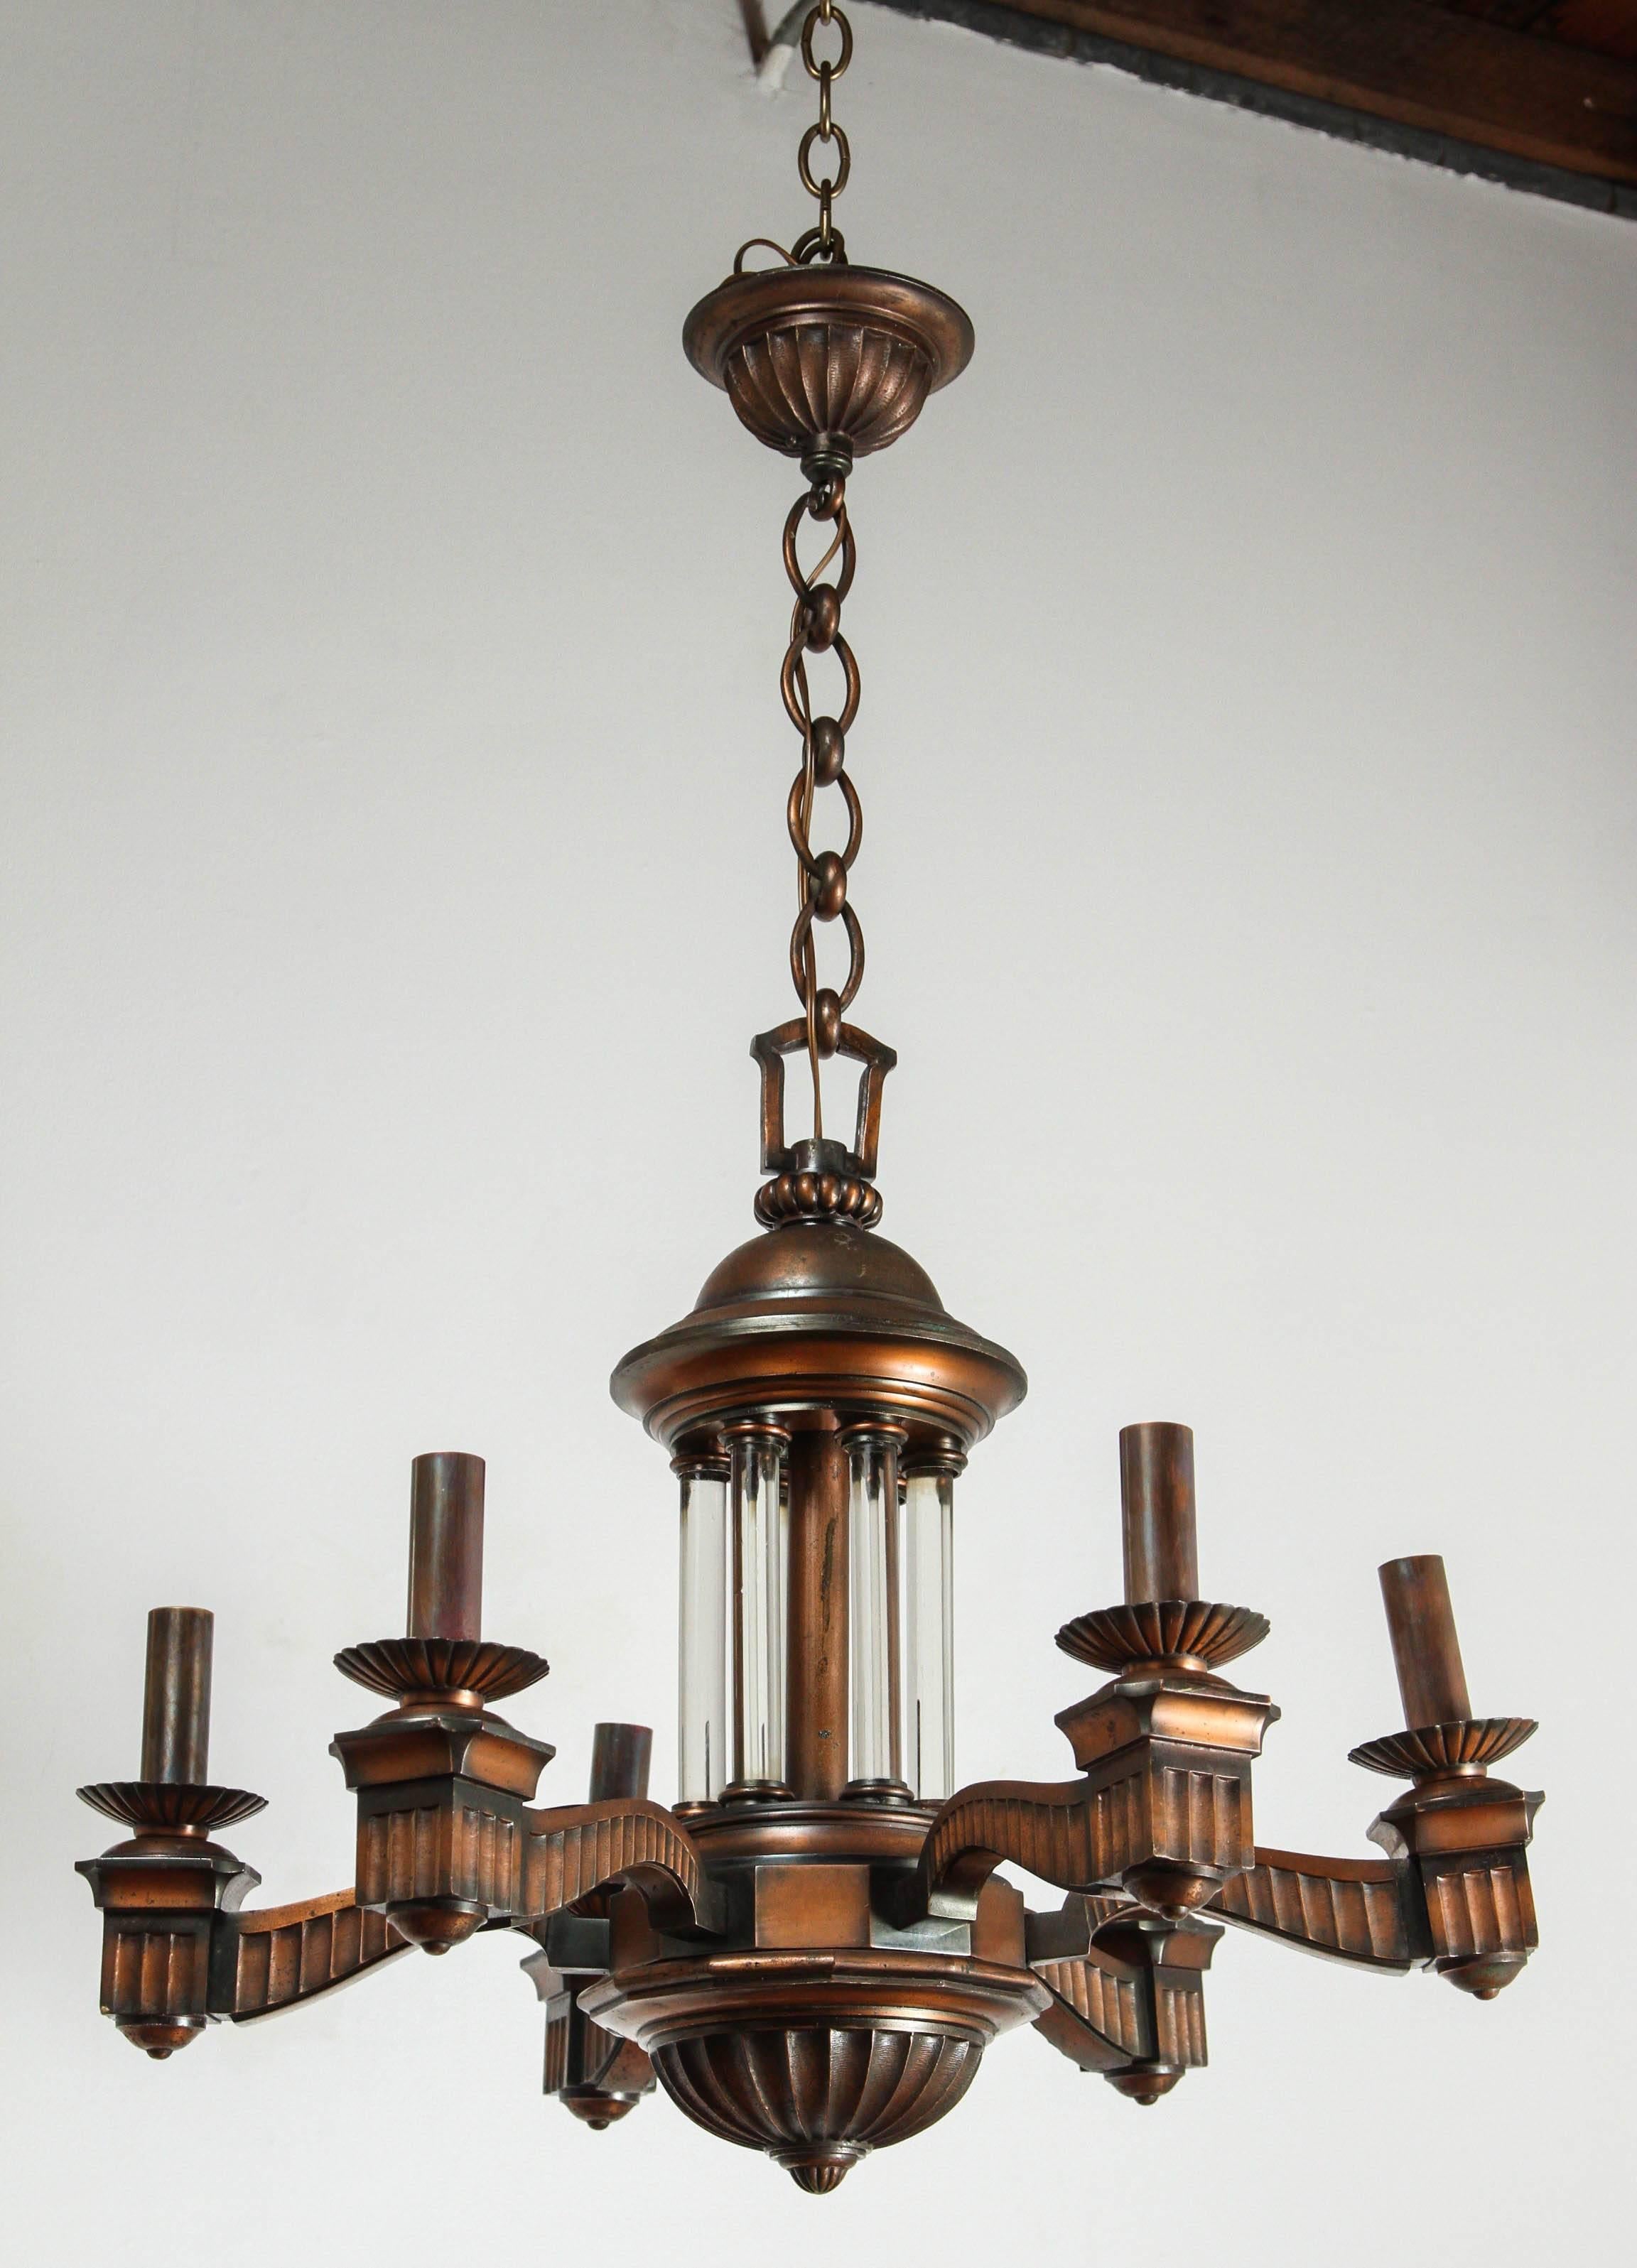 Bronze and glass neoclassical chandelier newly rewired for six standard bulbs.